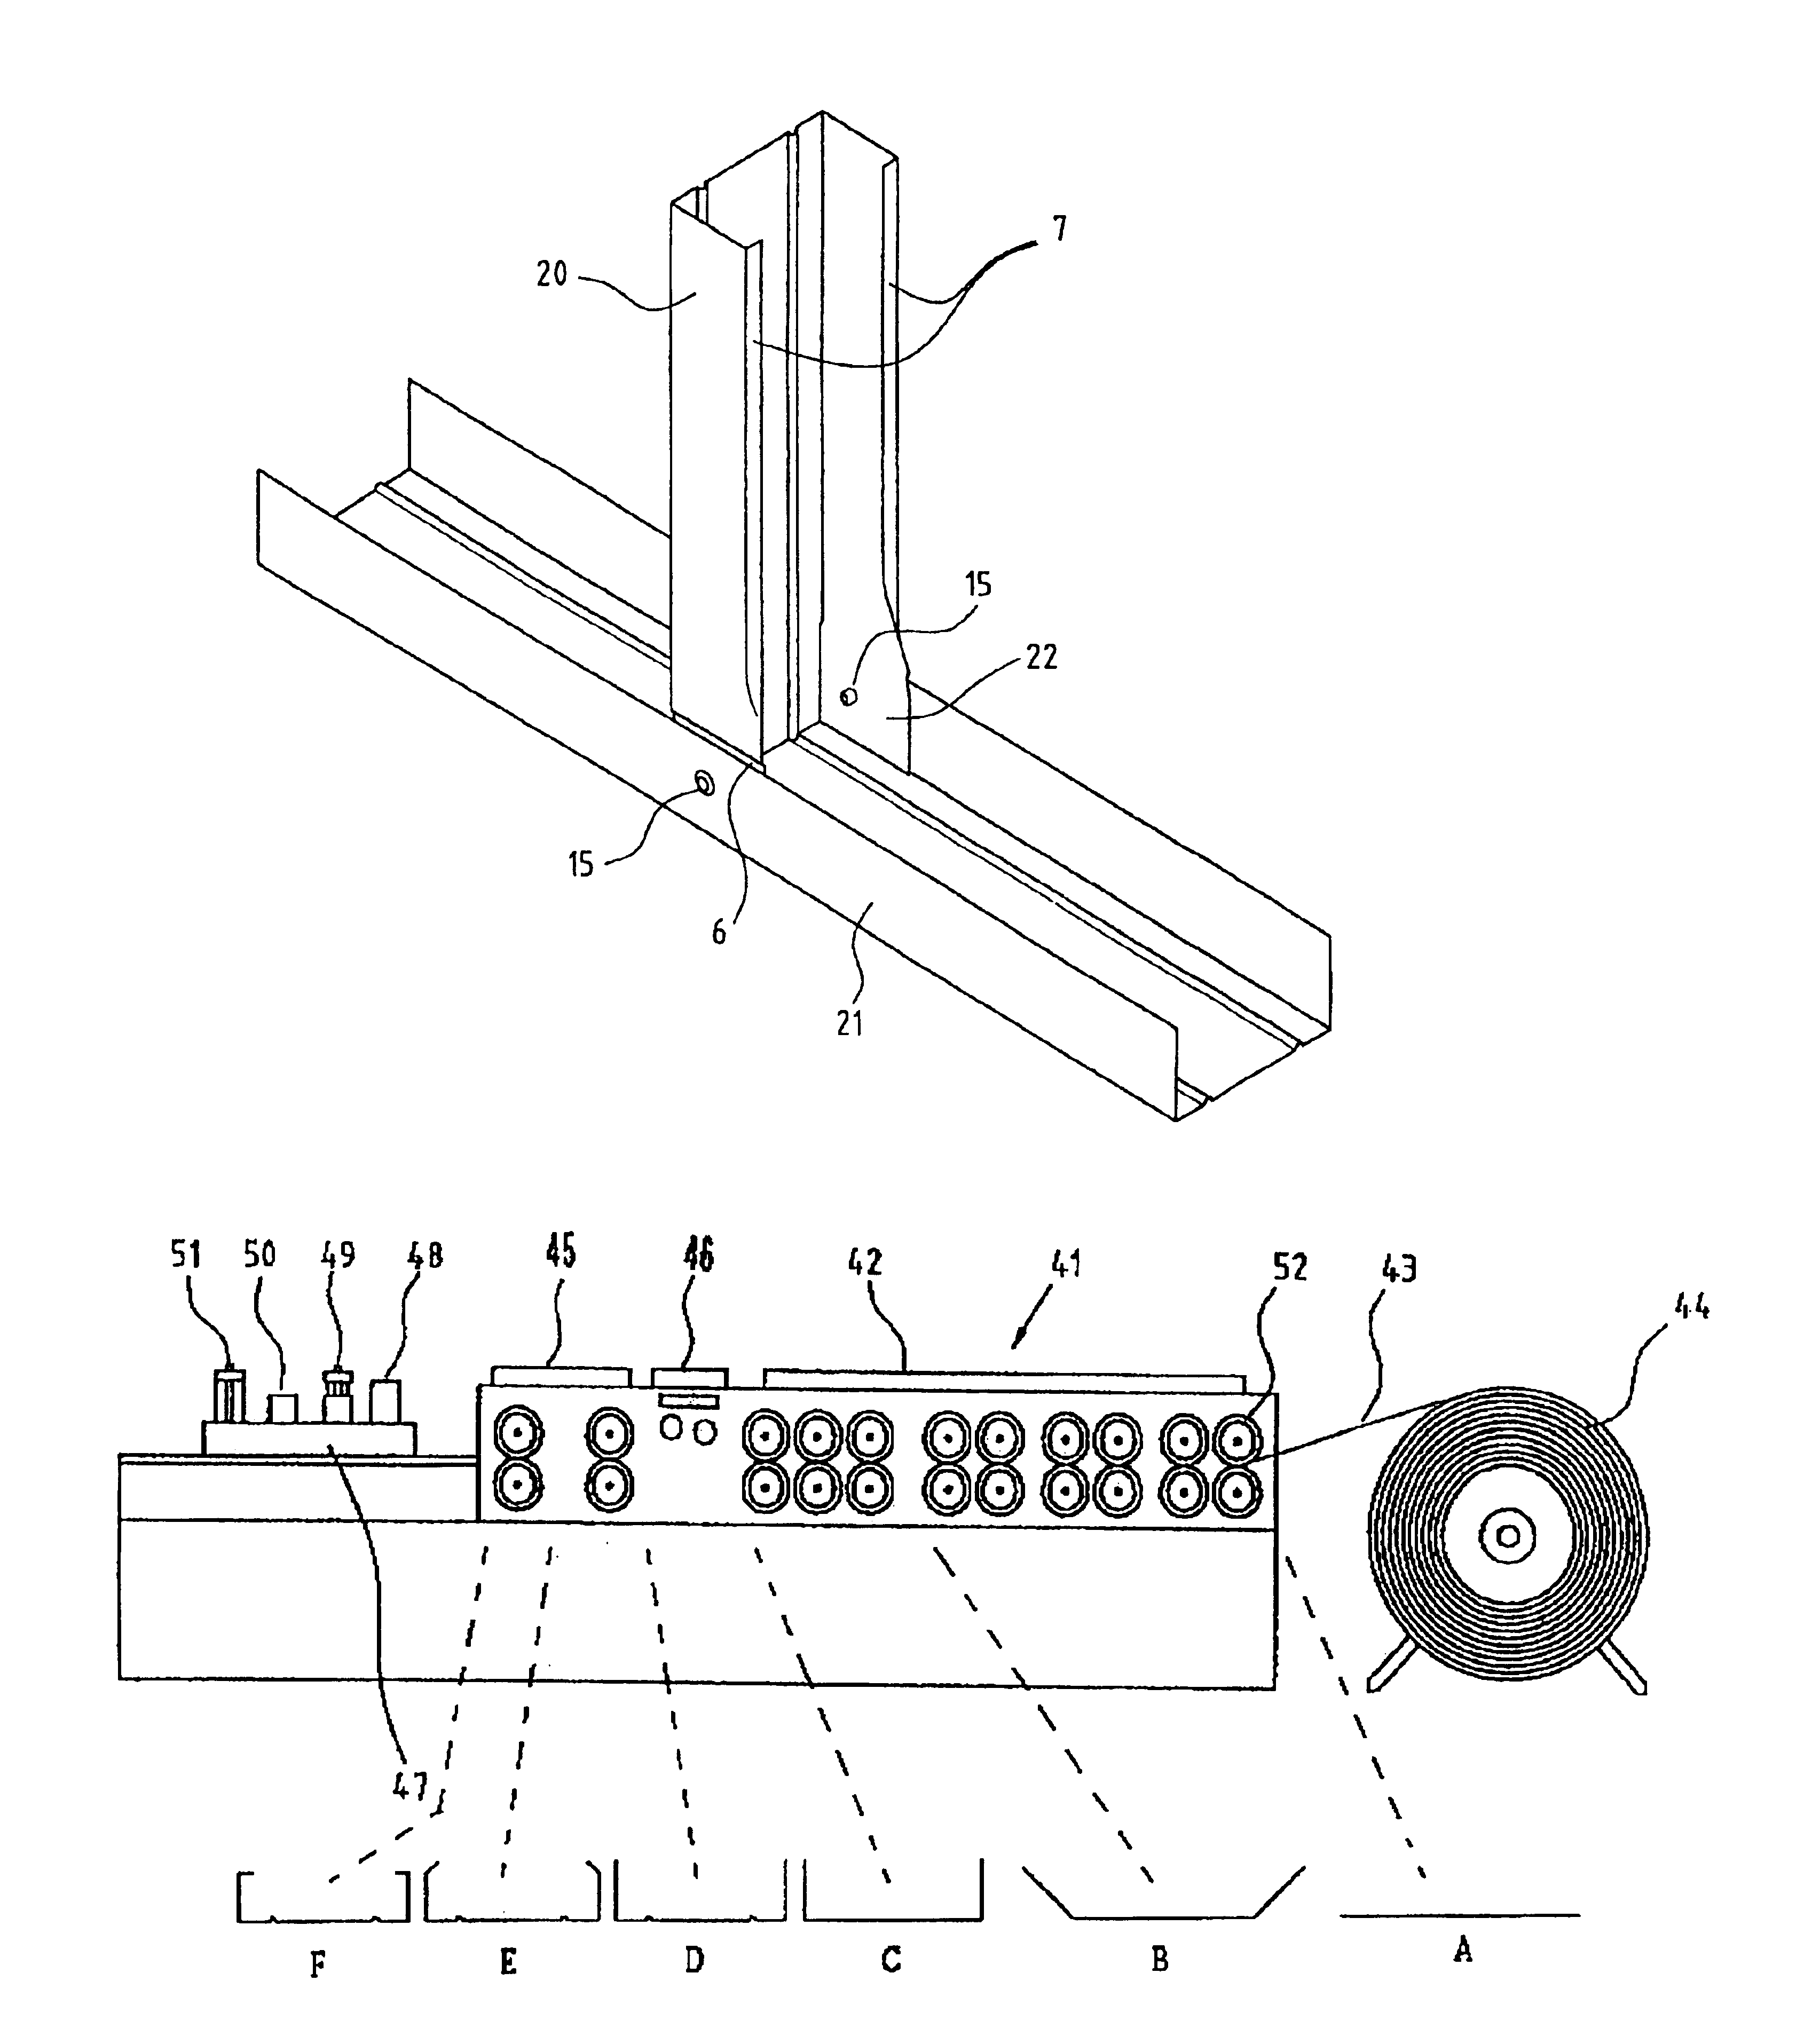 Method of making a frame member into U-section and C-section panel profiles